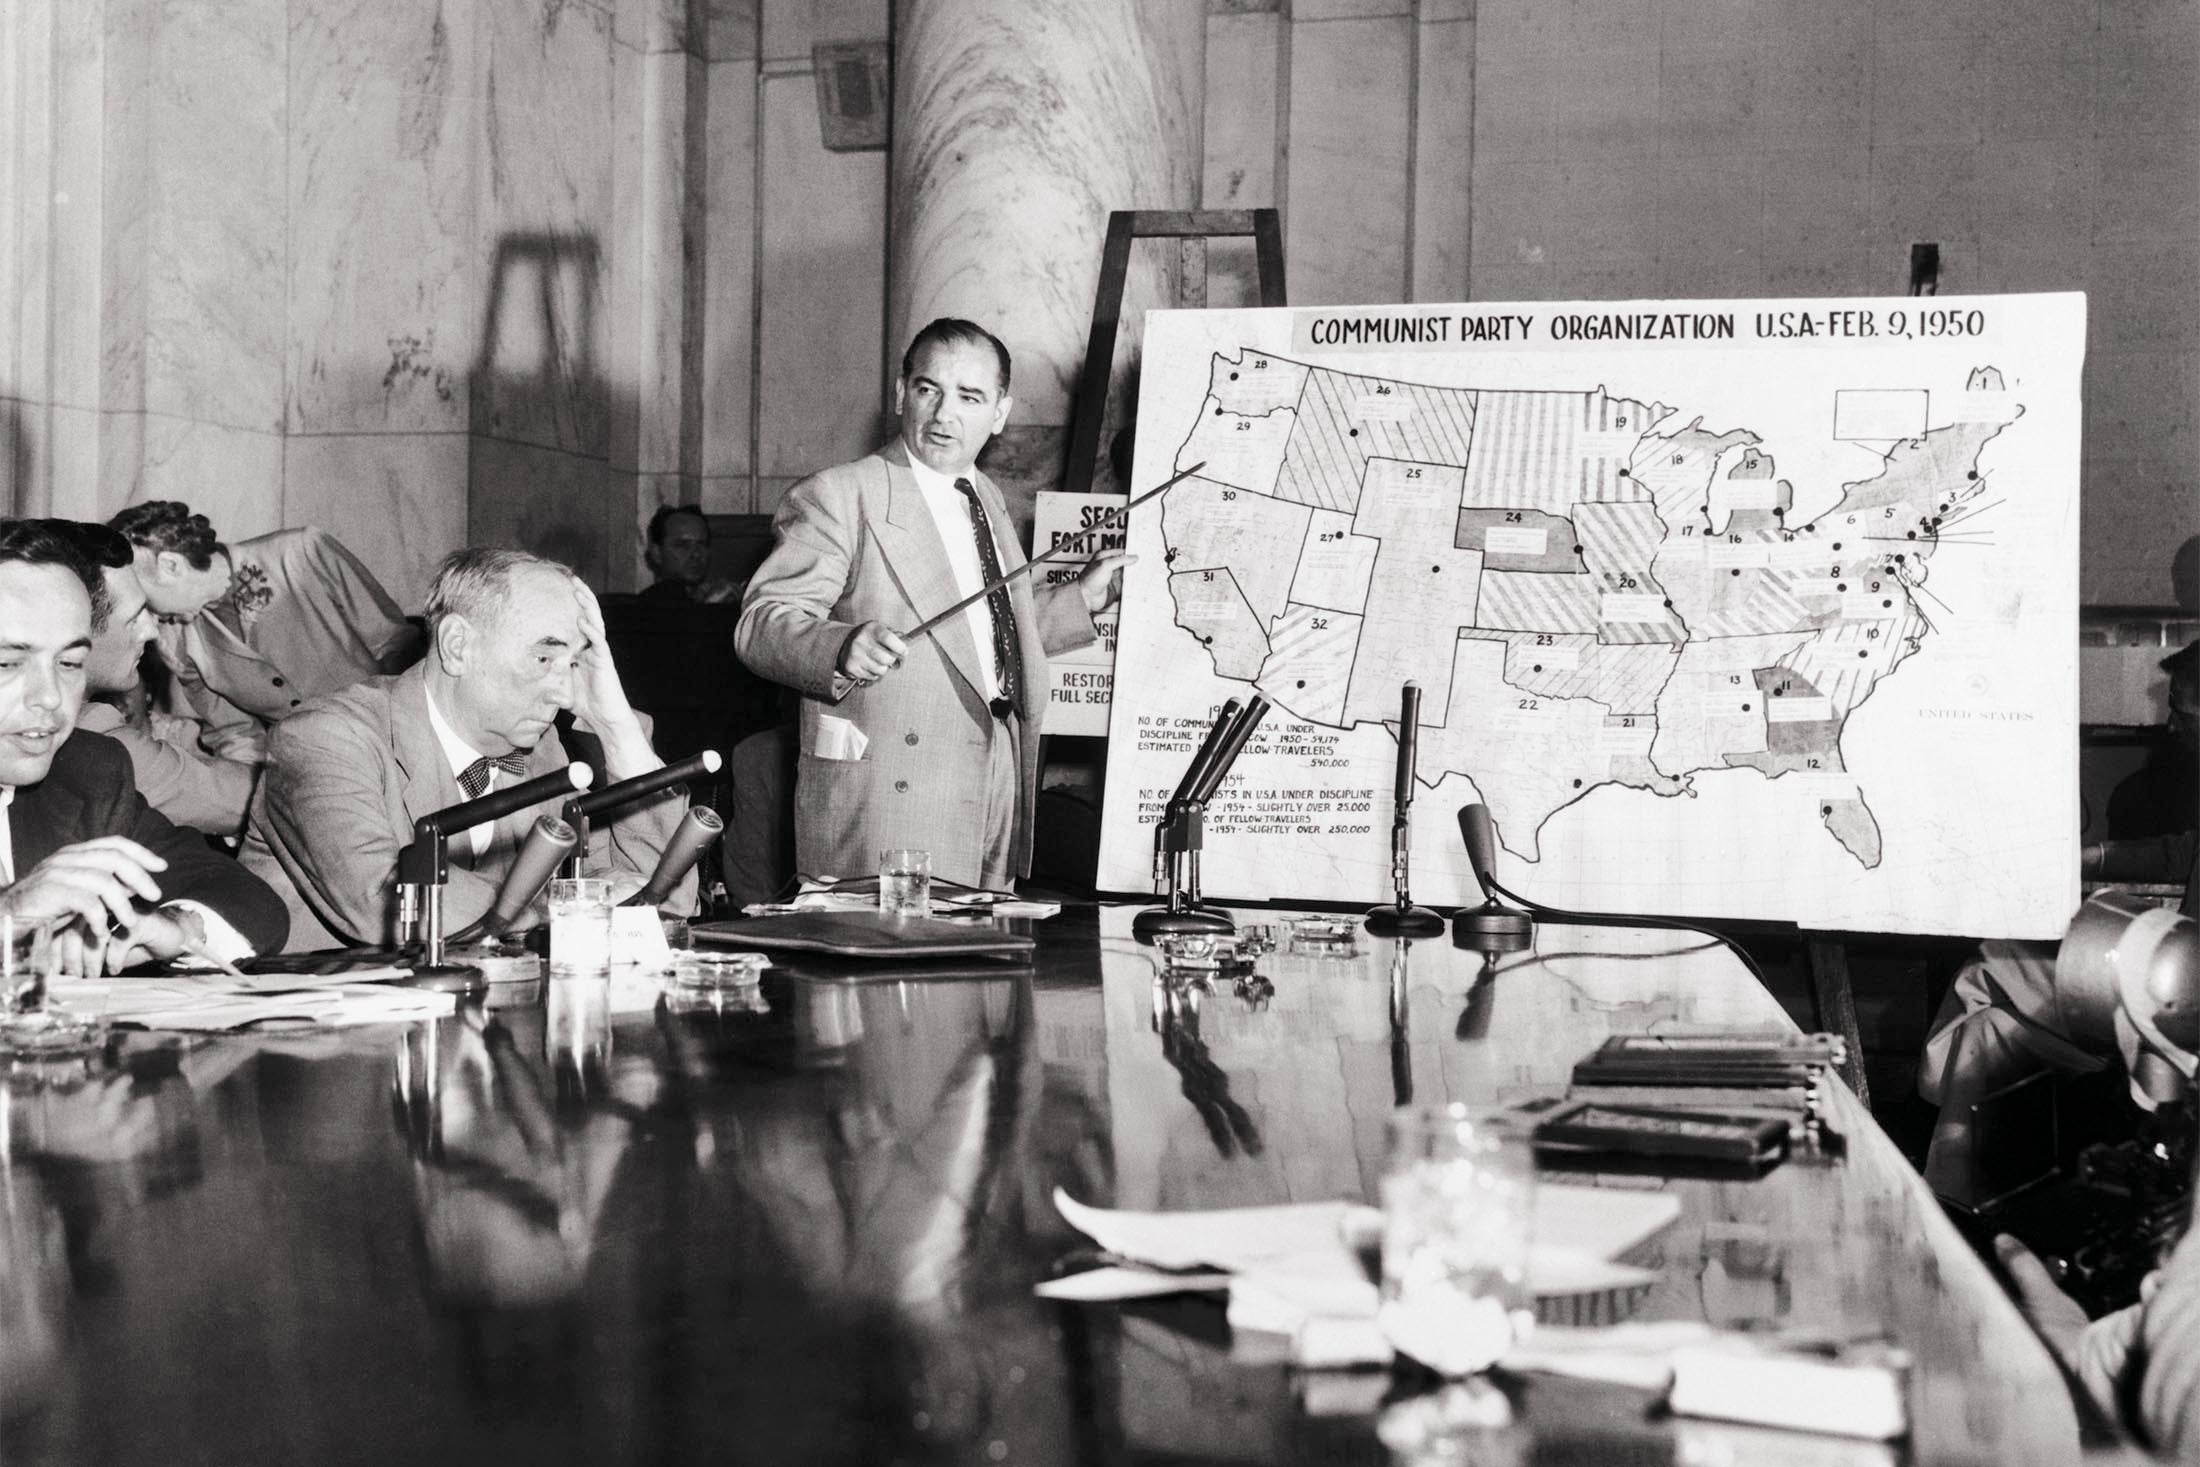 Sen. Joseph McCarthy points to a map depicting Communist Party organization across the U.S., in front of a conference table where Army counsel Joseph Welch and others are seated. Welch holds his head with his left hand in frustration.